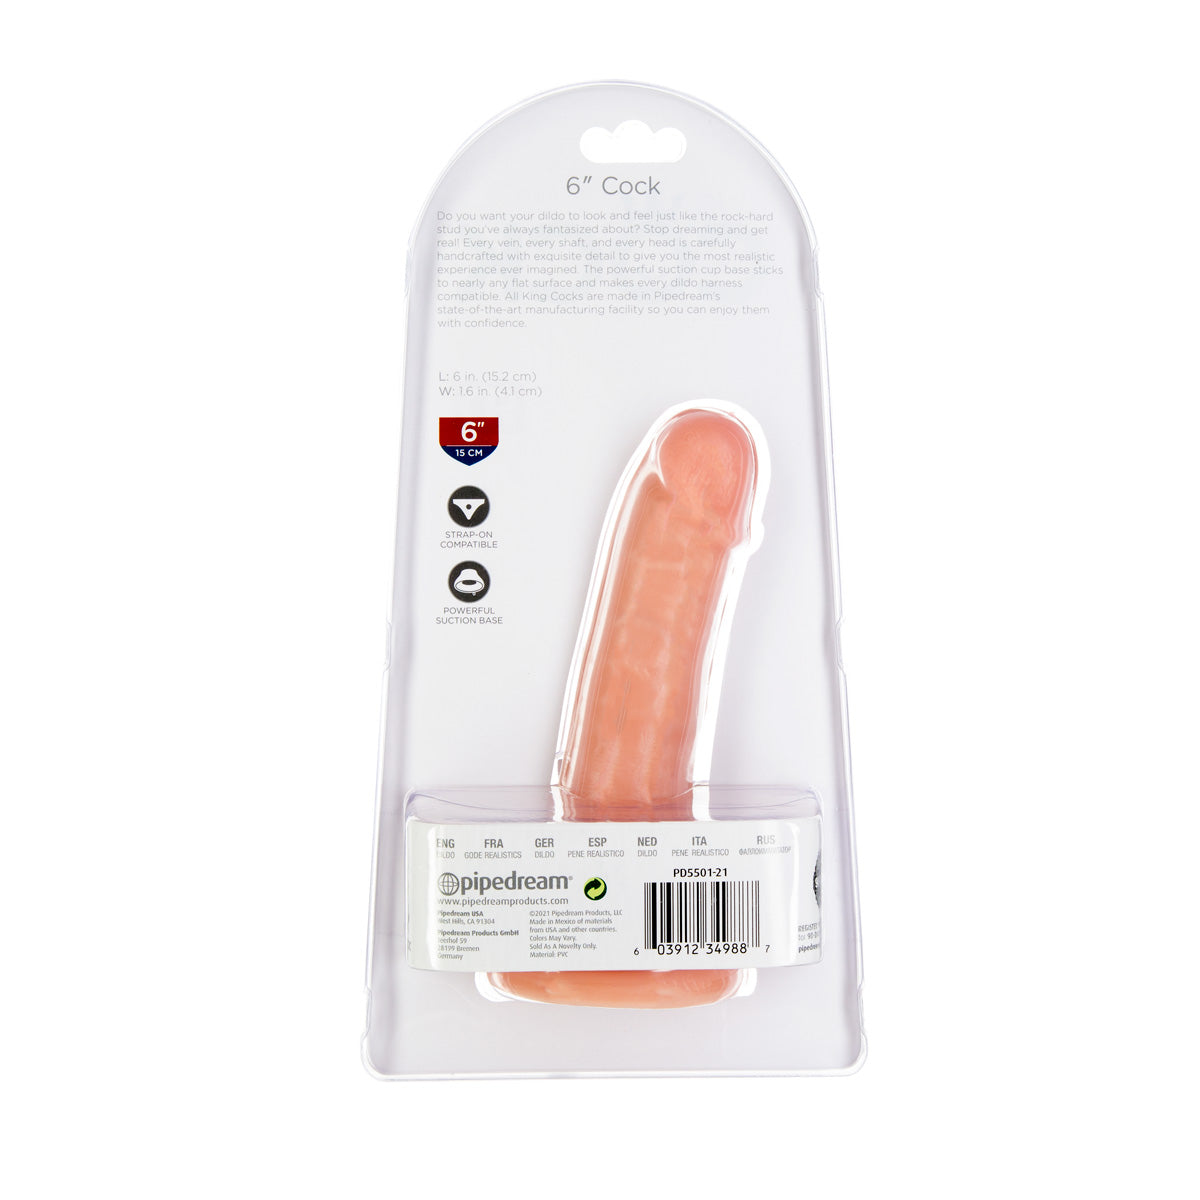 Pipedream Products King Cock 6 inch Dildo